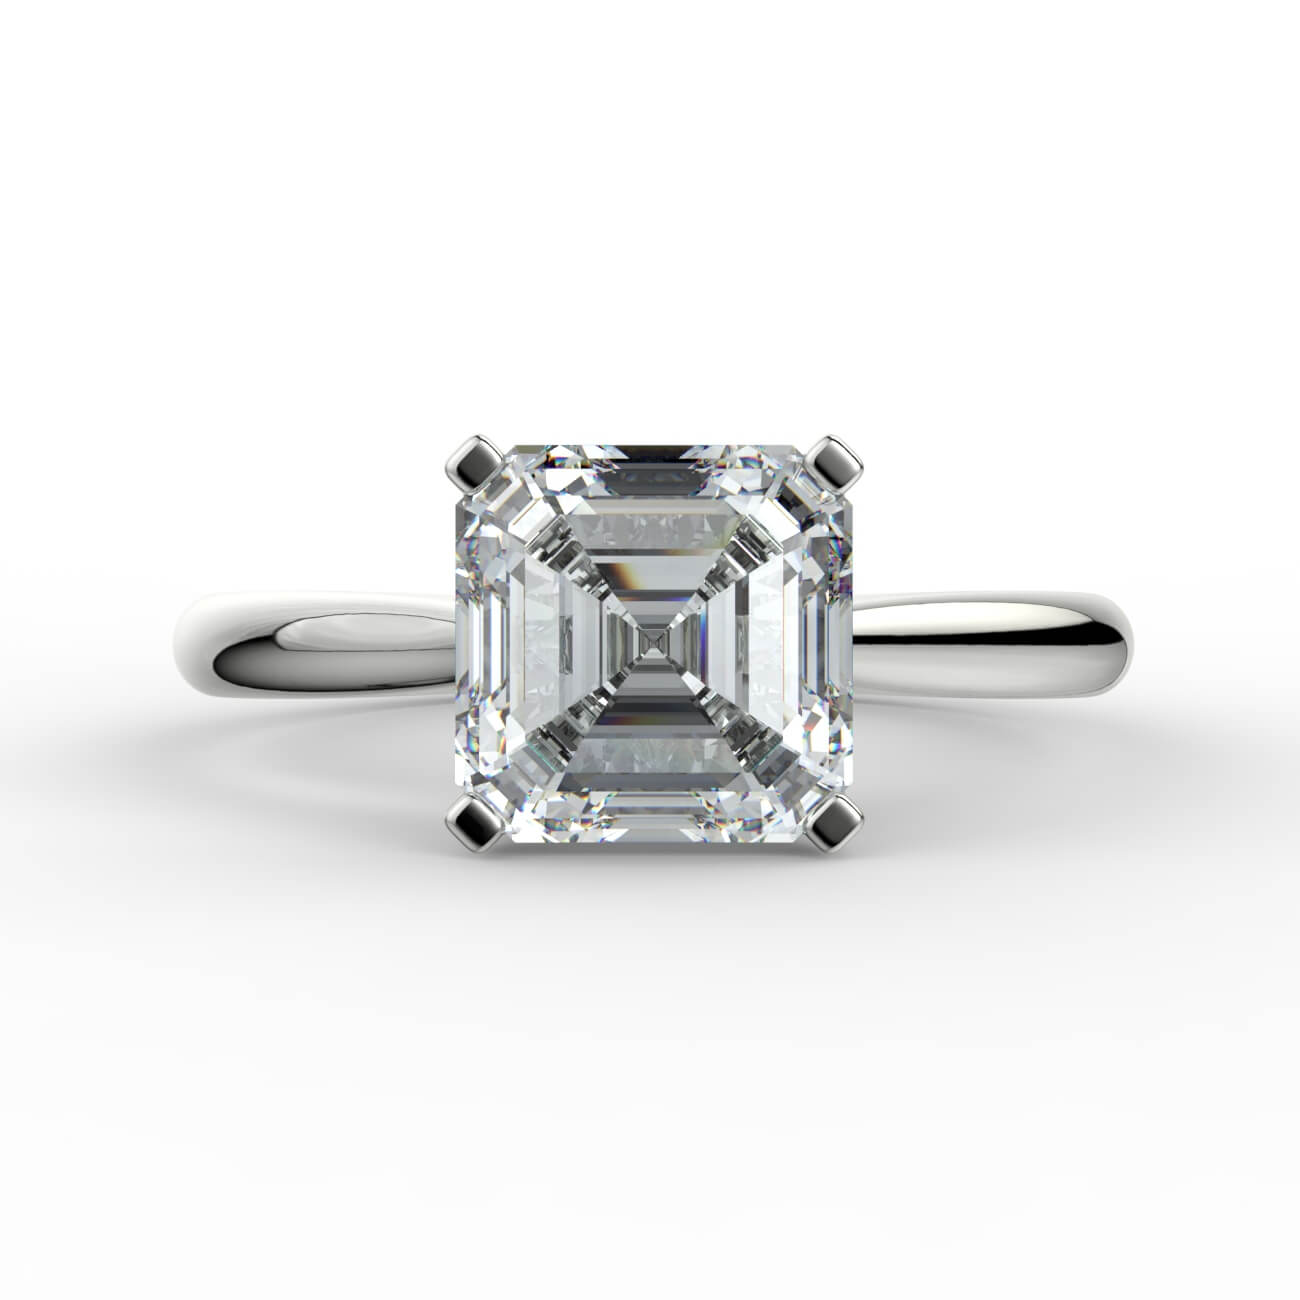 Asscher cut diamond cathedral engagement ring in white gold – Australian Diamond Network